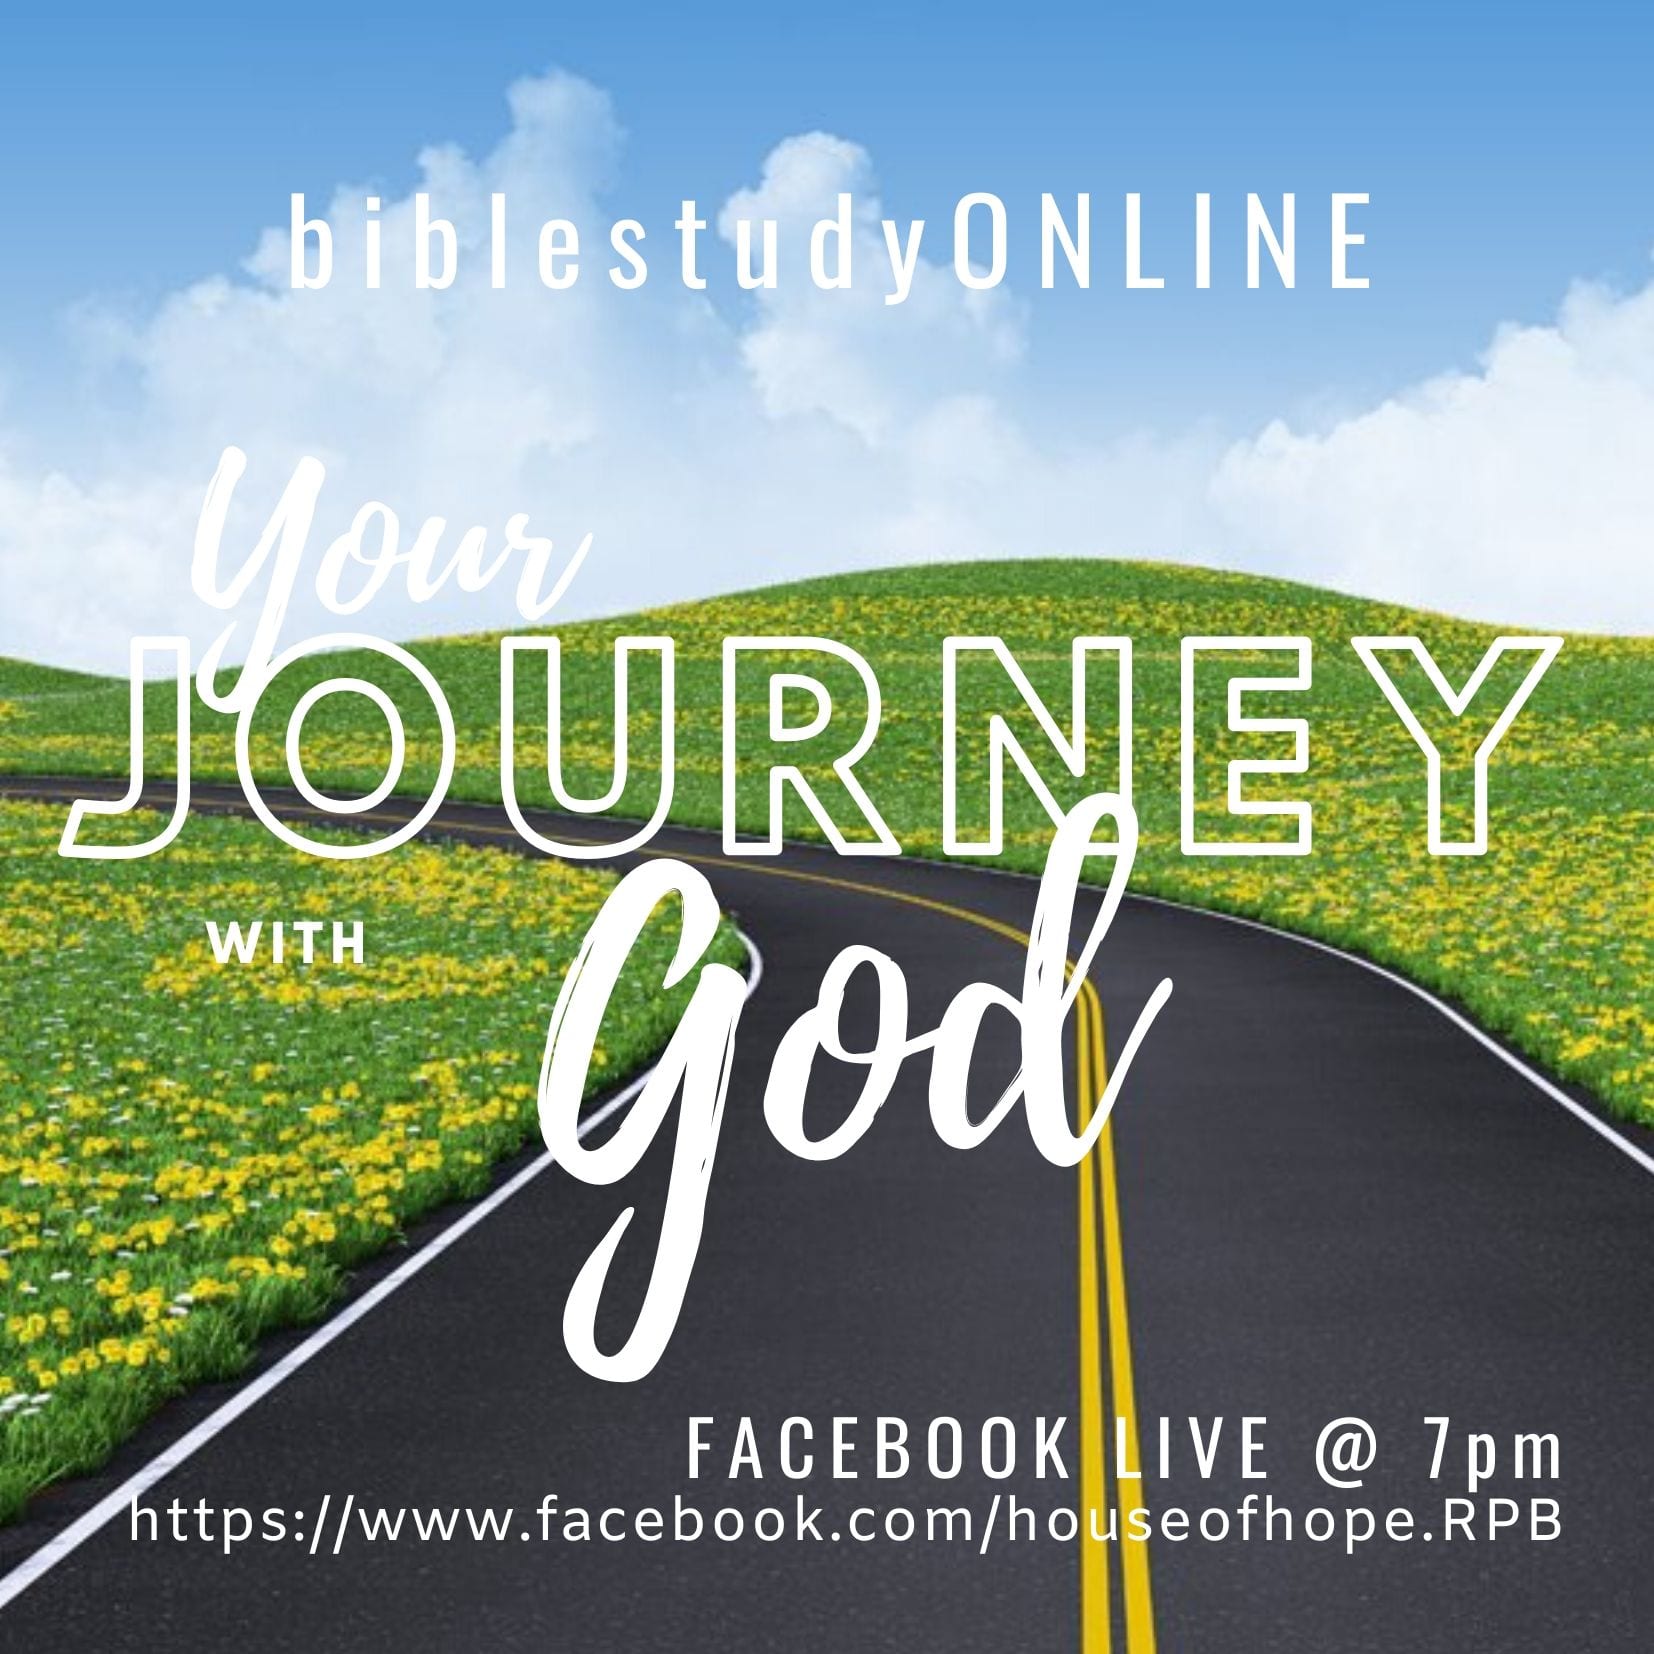 start your journey with god